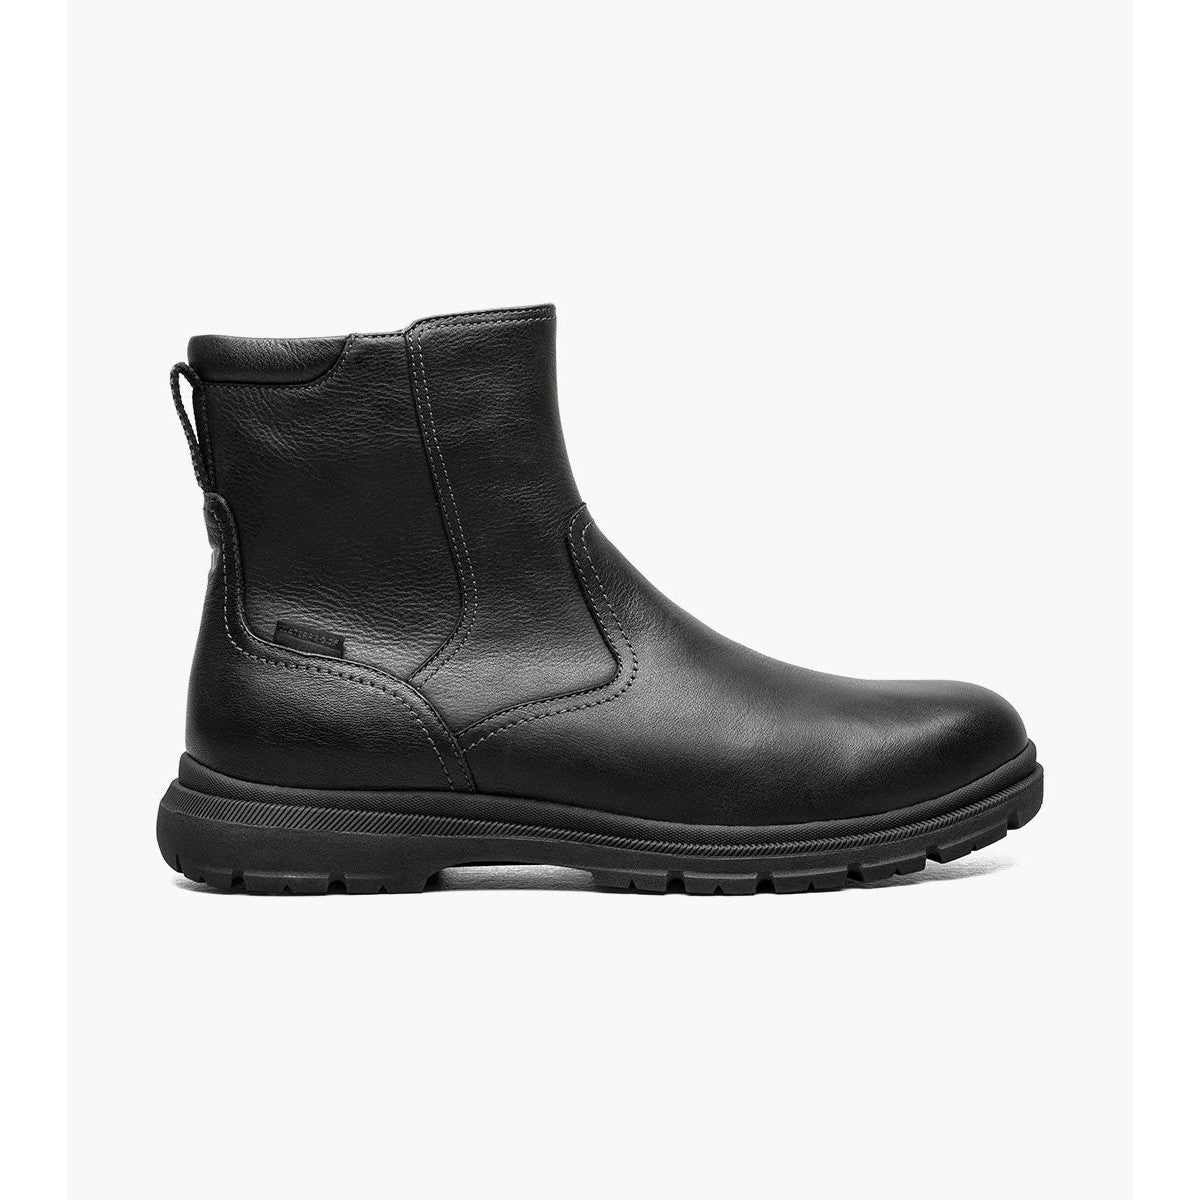 LOOKOUT TUMBLE LEATHER ZIP BOOT-MENS BOOTS-FLORSHEIM-JB Evans Fashions & Footwear